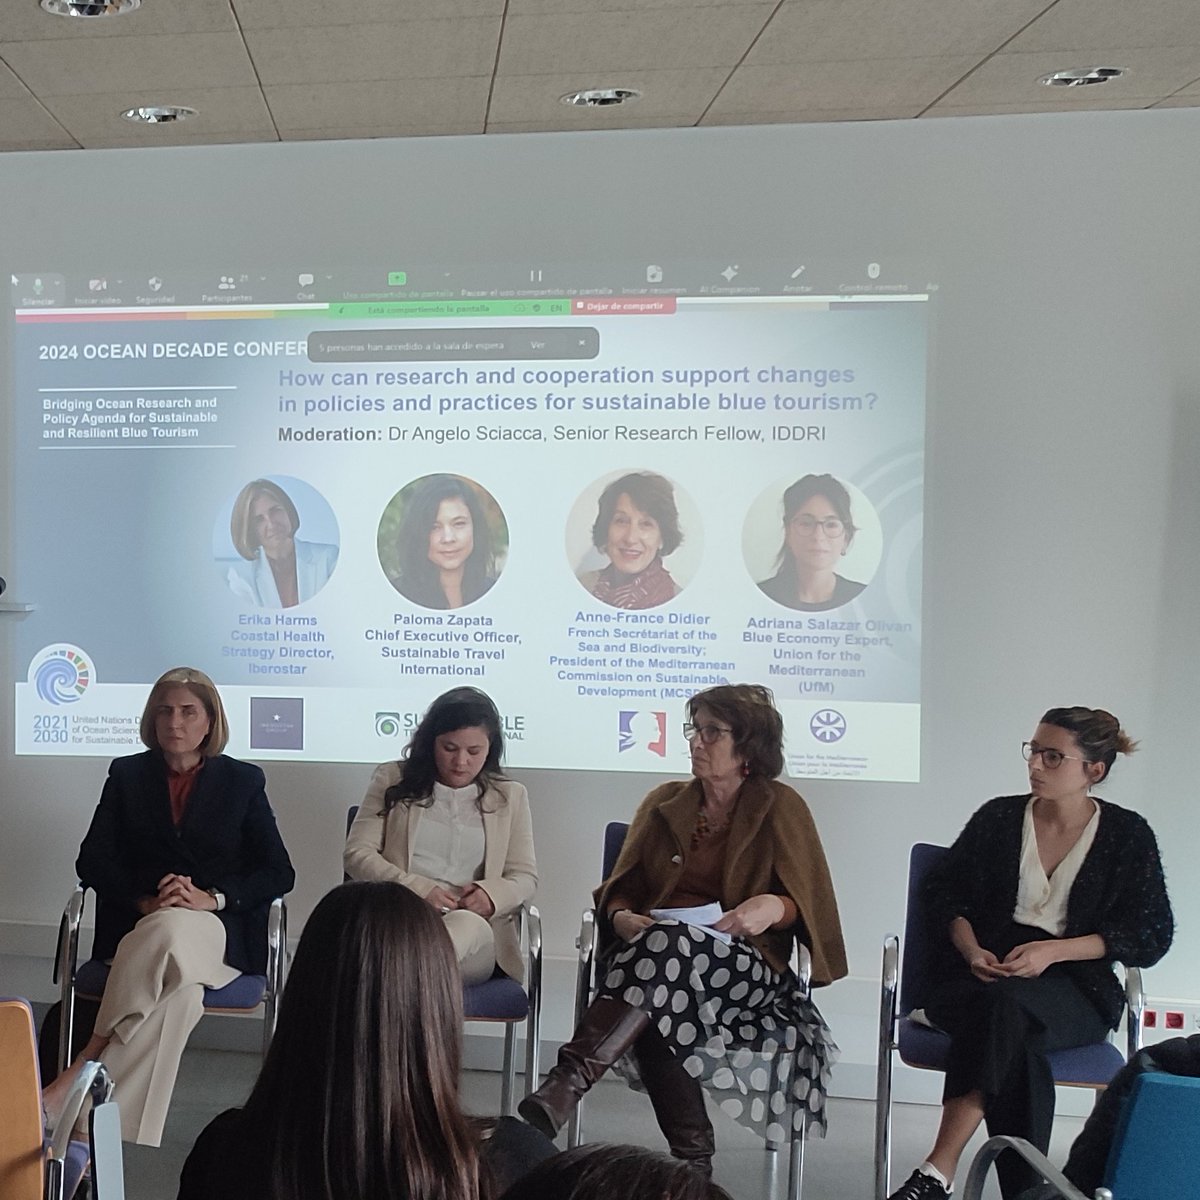 During #OceanDecadeWeek, our Coastal Health Strategy Director, Erika Harms, joined @WestMedStrat's roundtable on supporting sustainable blue tourism through research and intergovernmental cooperation where solutions were explored to drive change within the tourism sector.